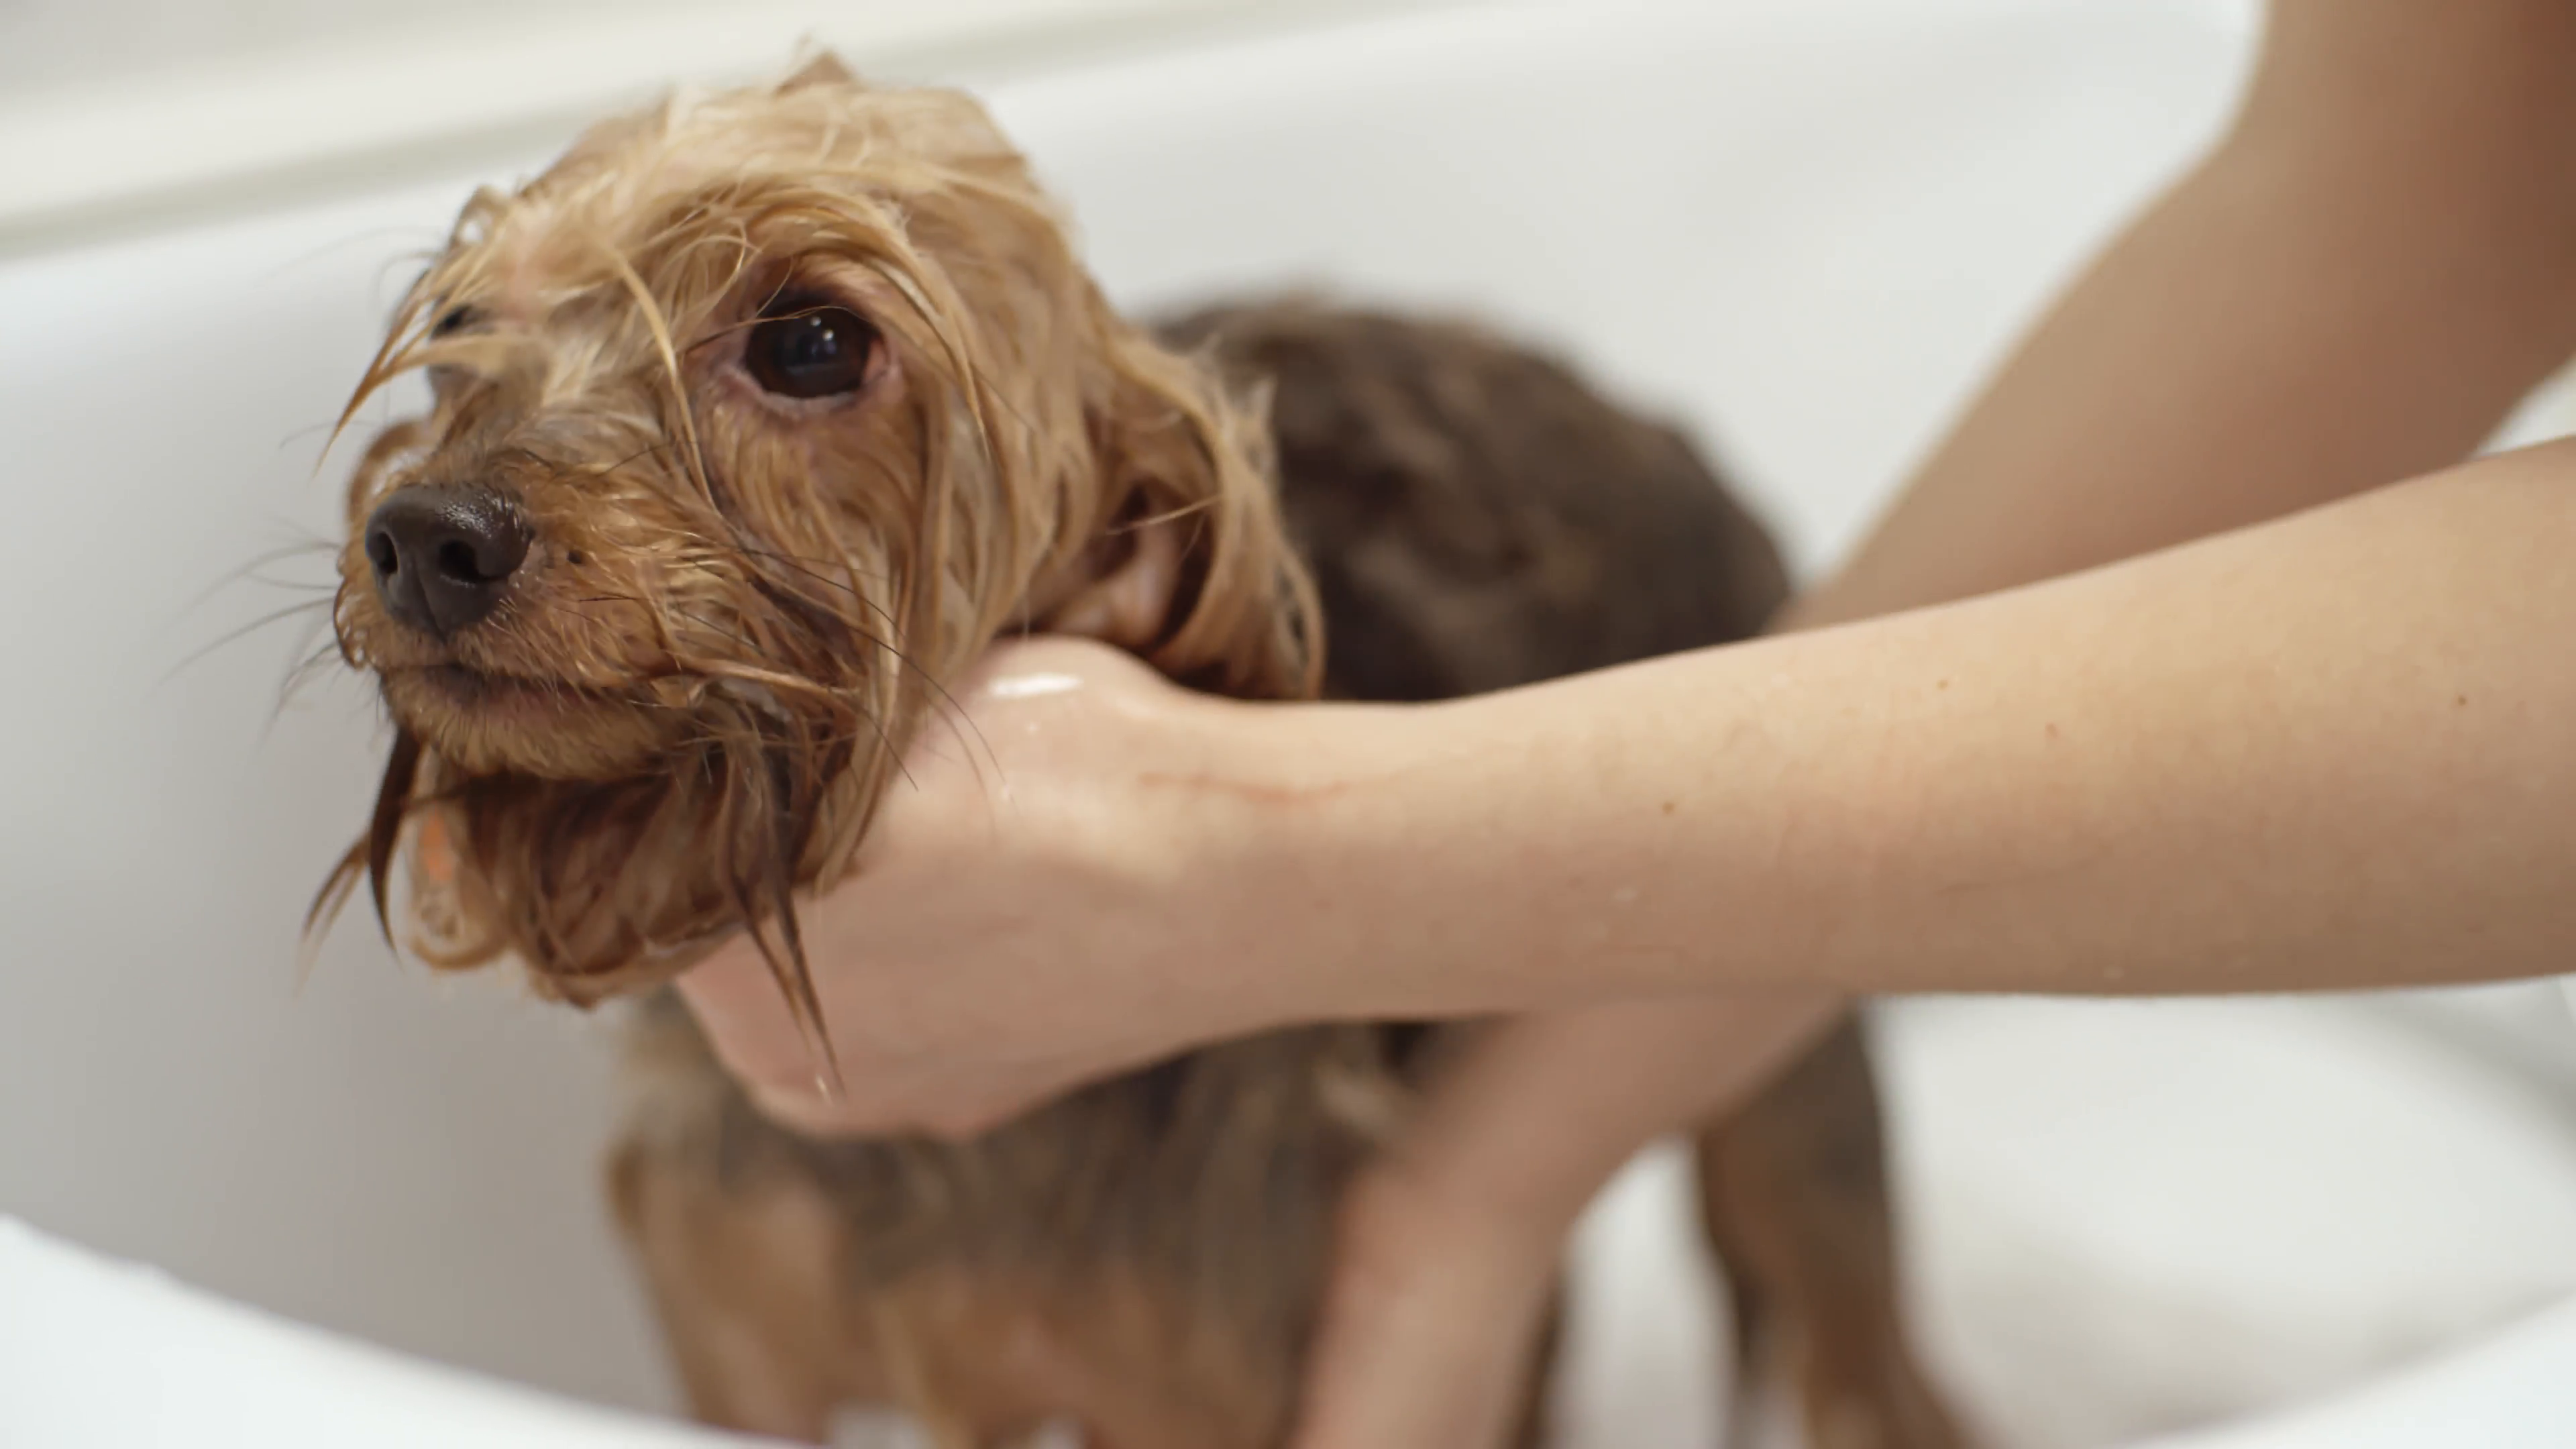 A Yorkshire Terrier being washed in the bathtub